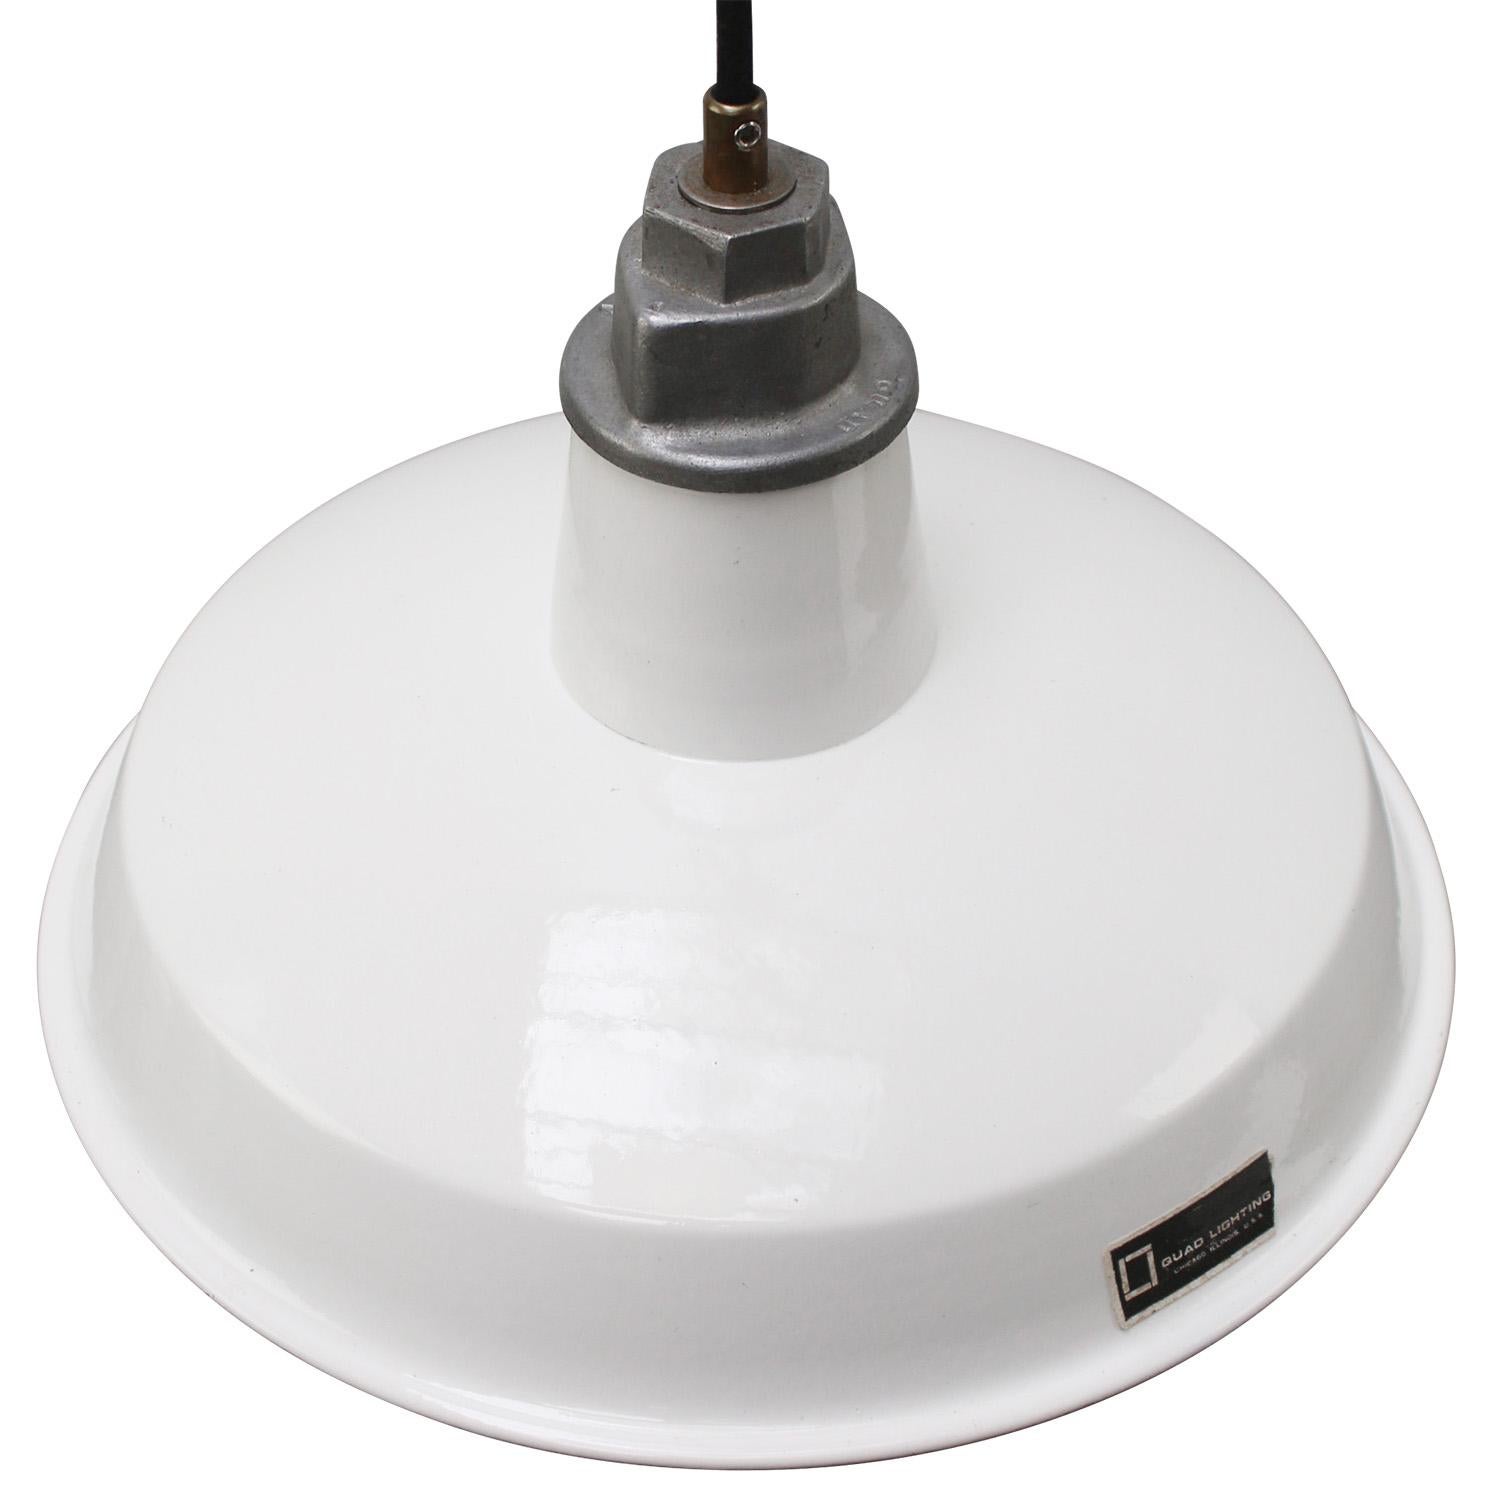 American industrial factory pendant light
white enamel white interior.
Aluminum top

Weight: 1.10 kg / 2.4 lb

riced per individual item. All lamps have been made suitable by international standards for incandescent light bulbs, energy-efficient and